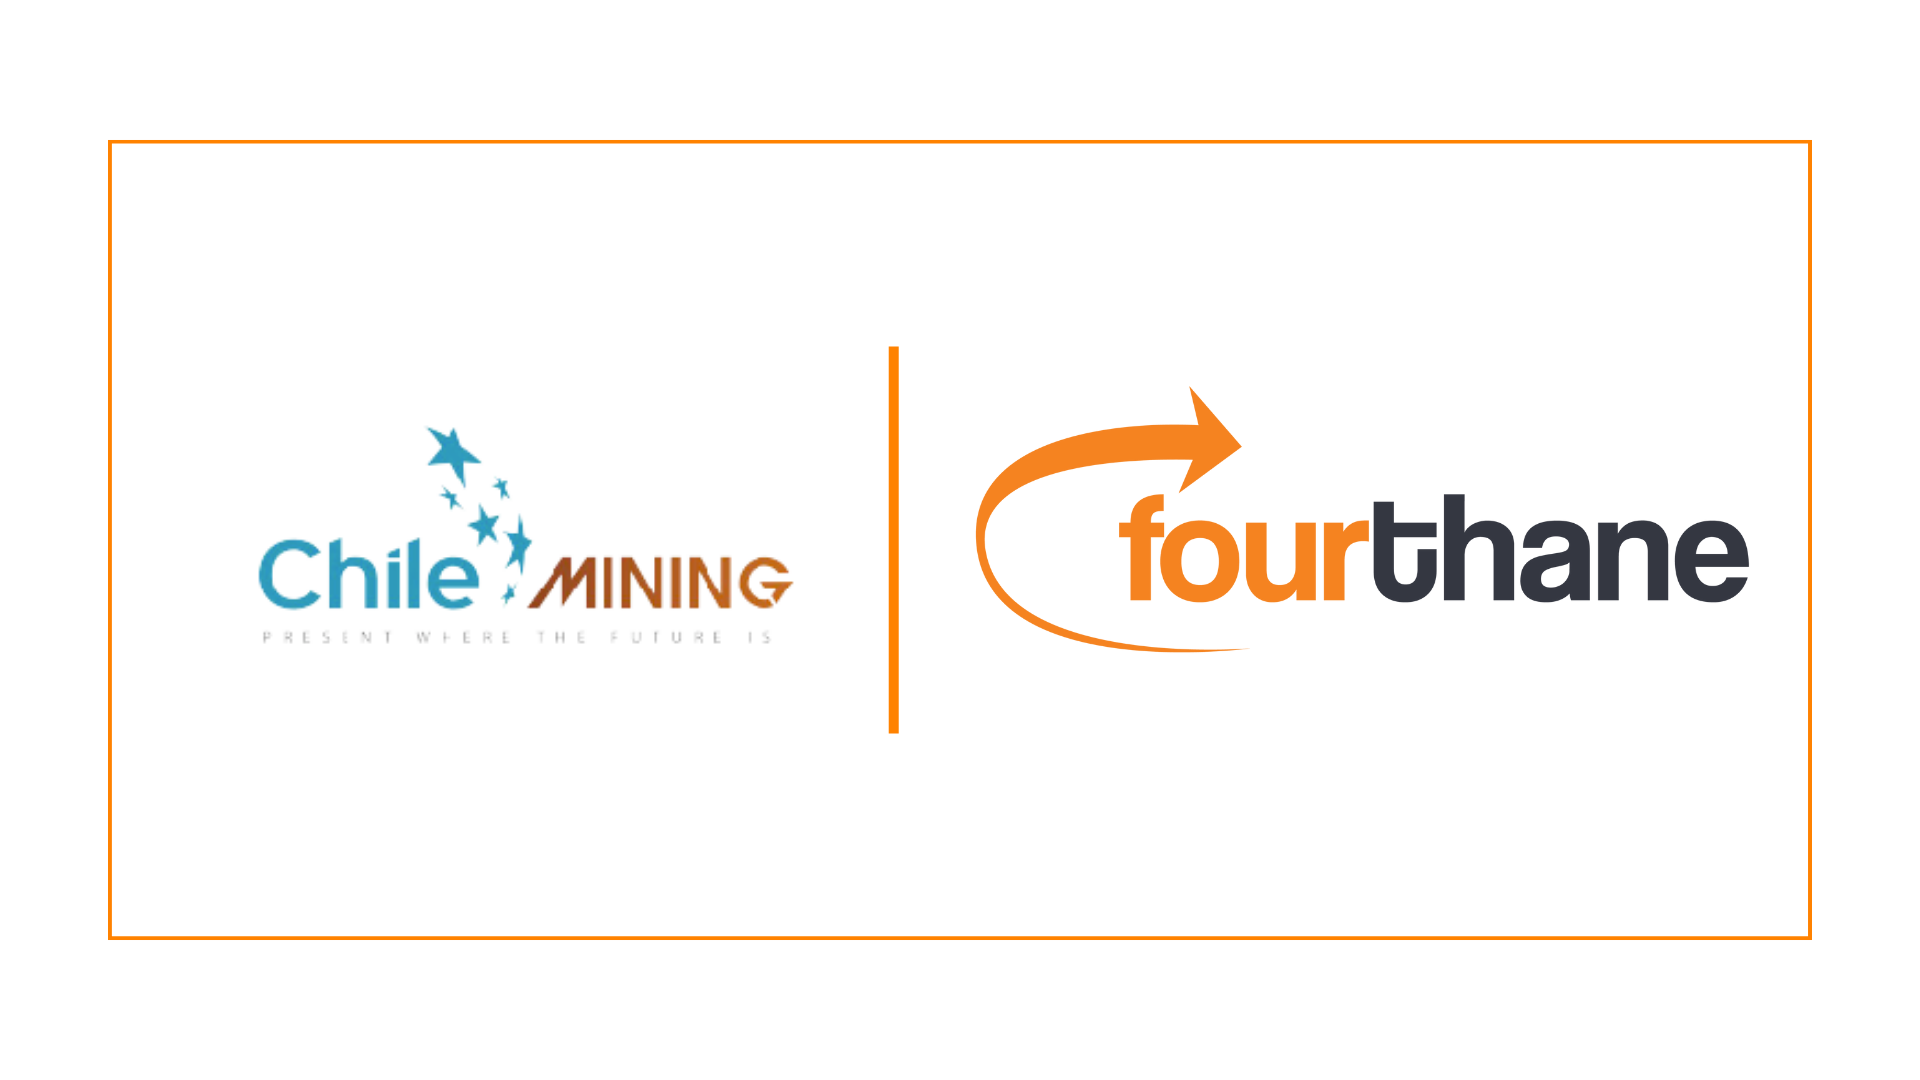 Fourthane is part of Chile Mining